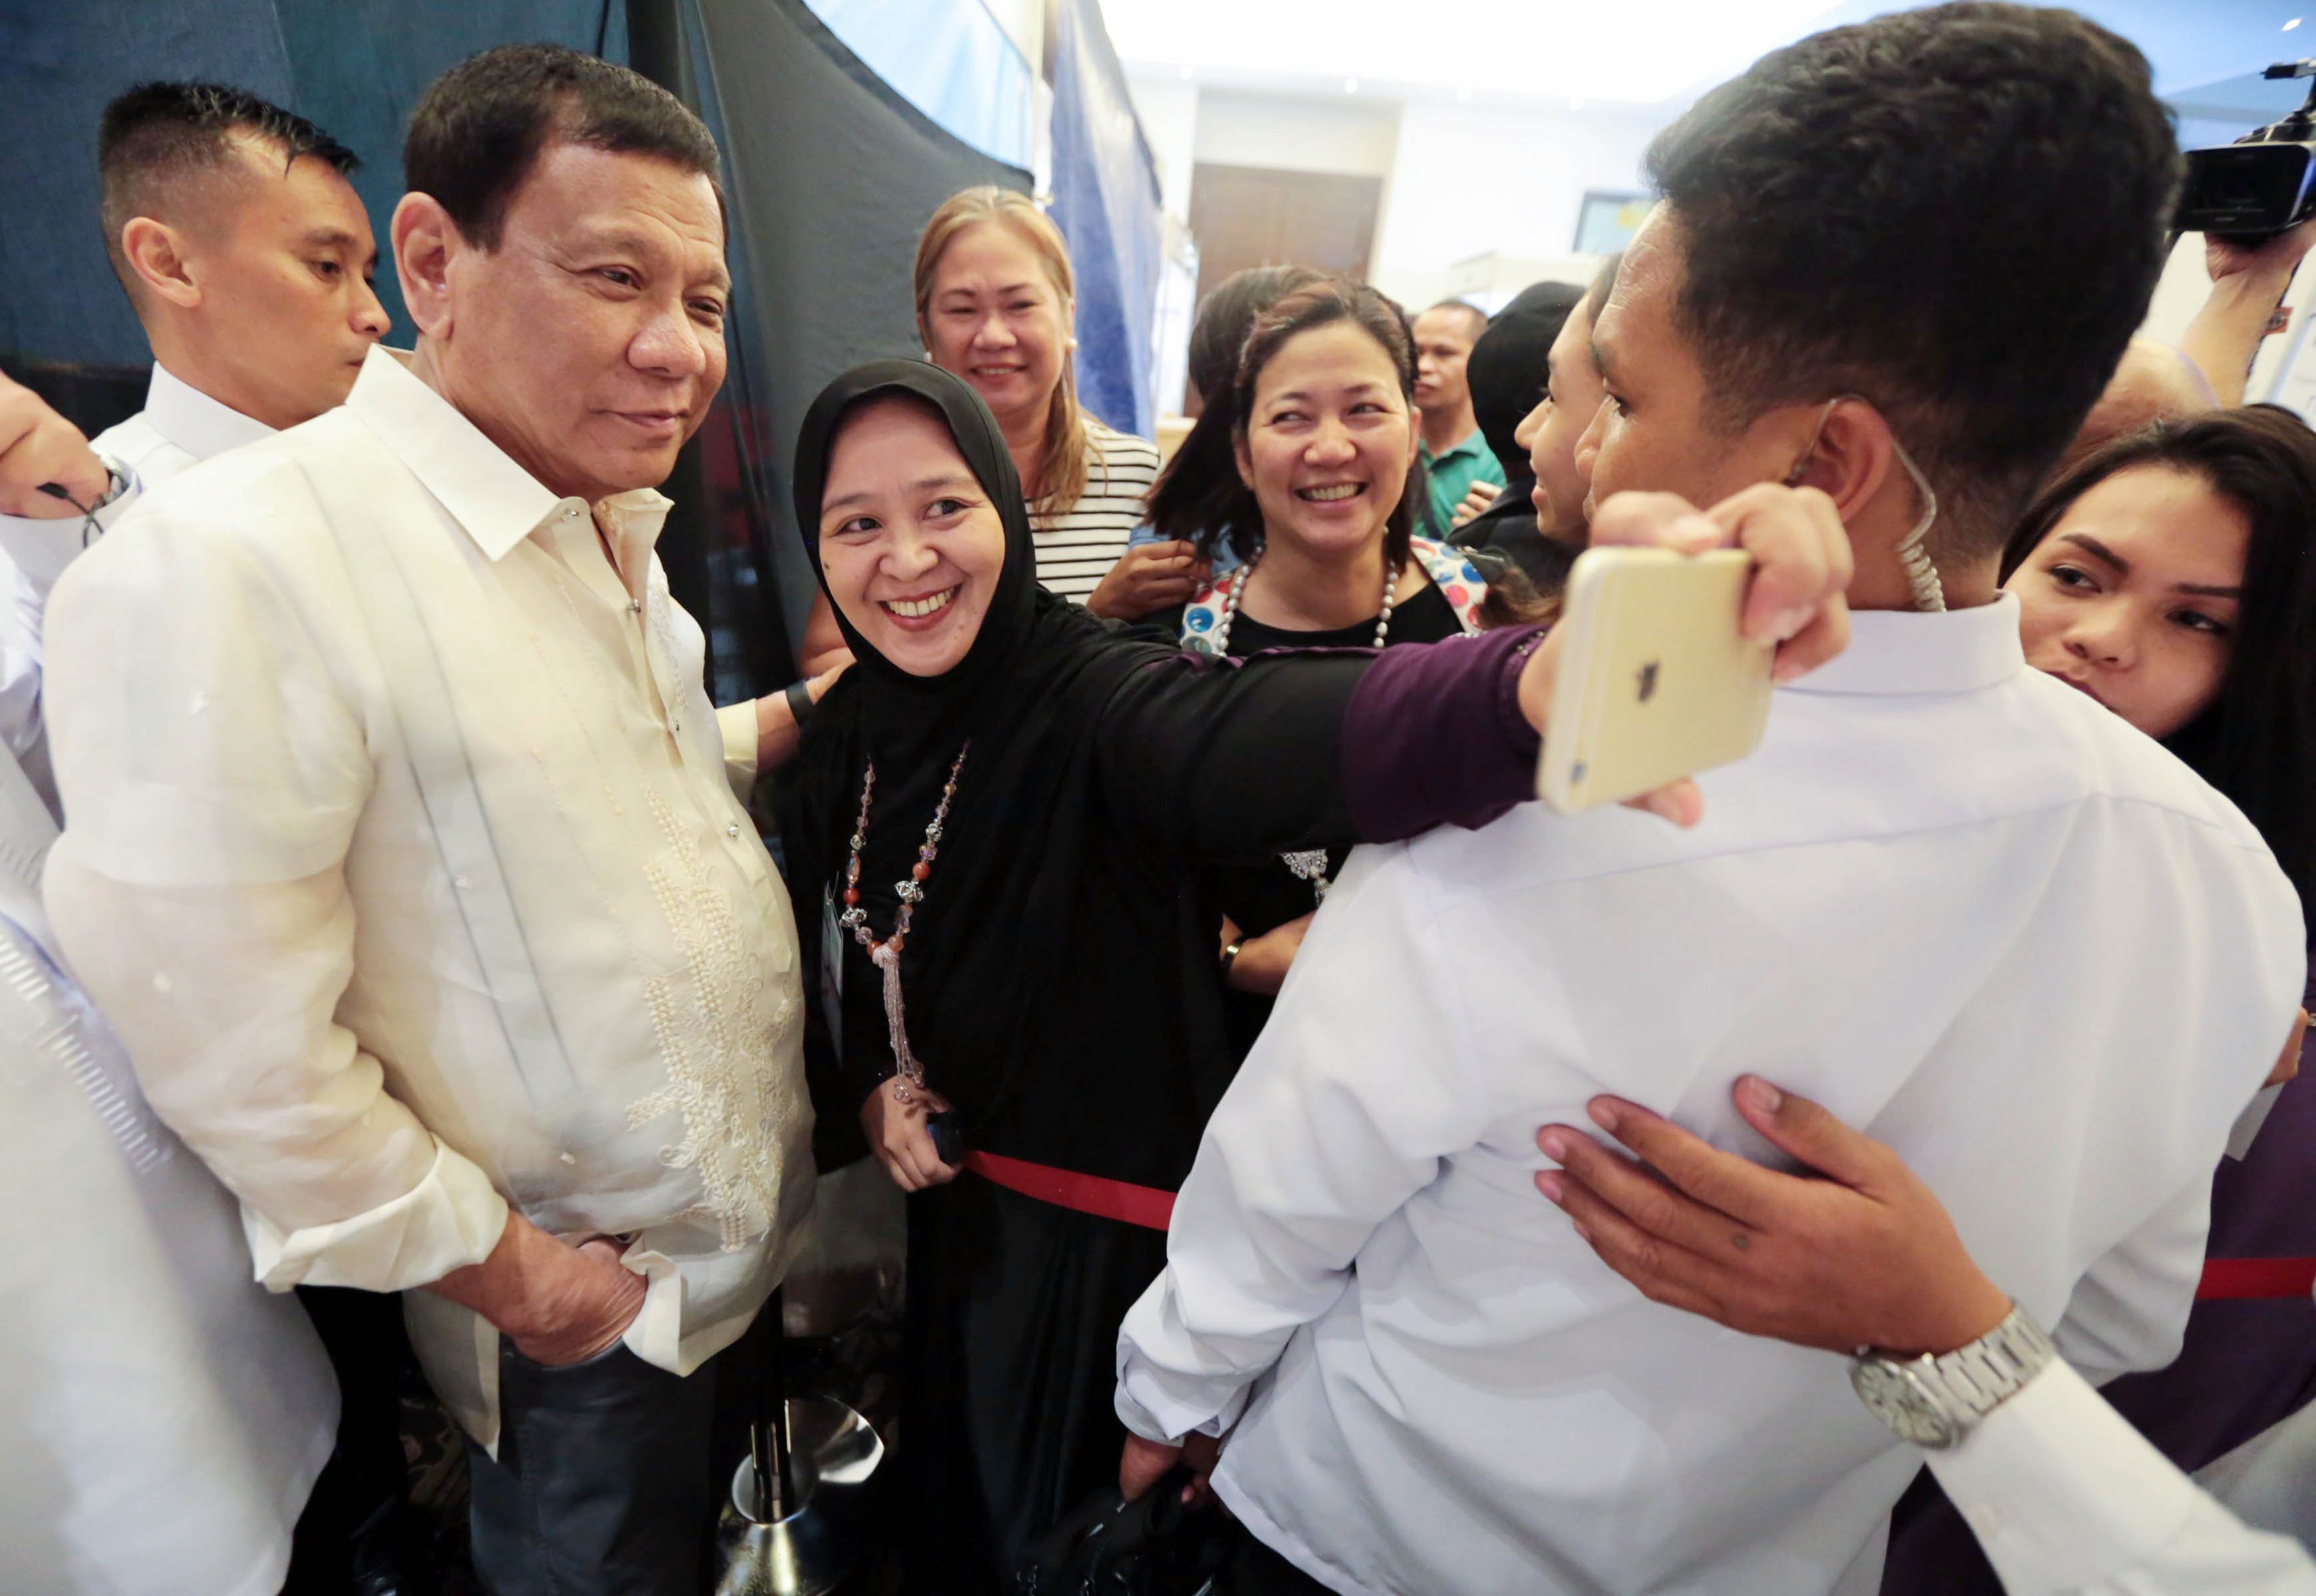 President Duterte grants a photo opportunity to an attendee of the Integrated Bar of the Philippines 16th National Convention of Lawyers